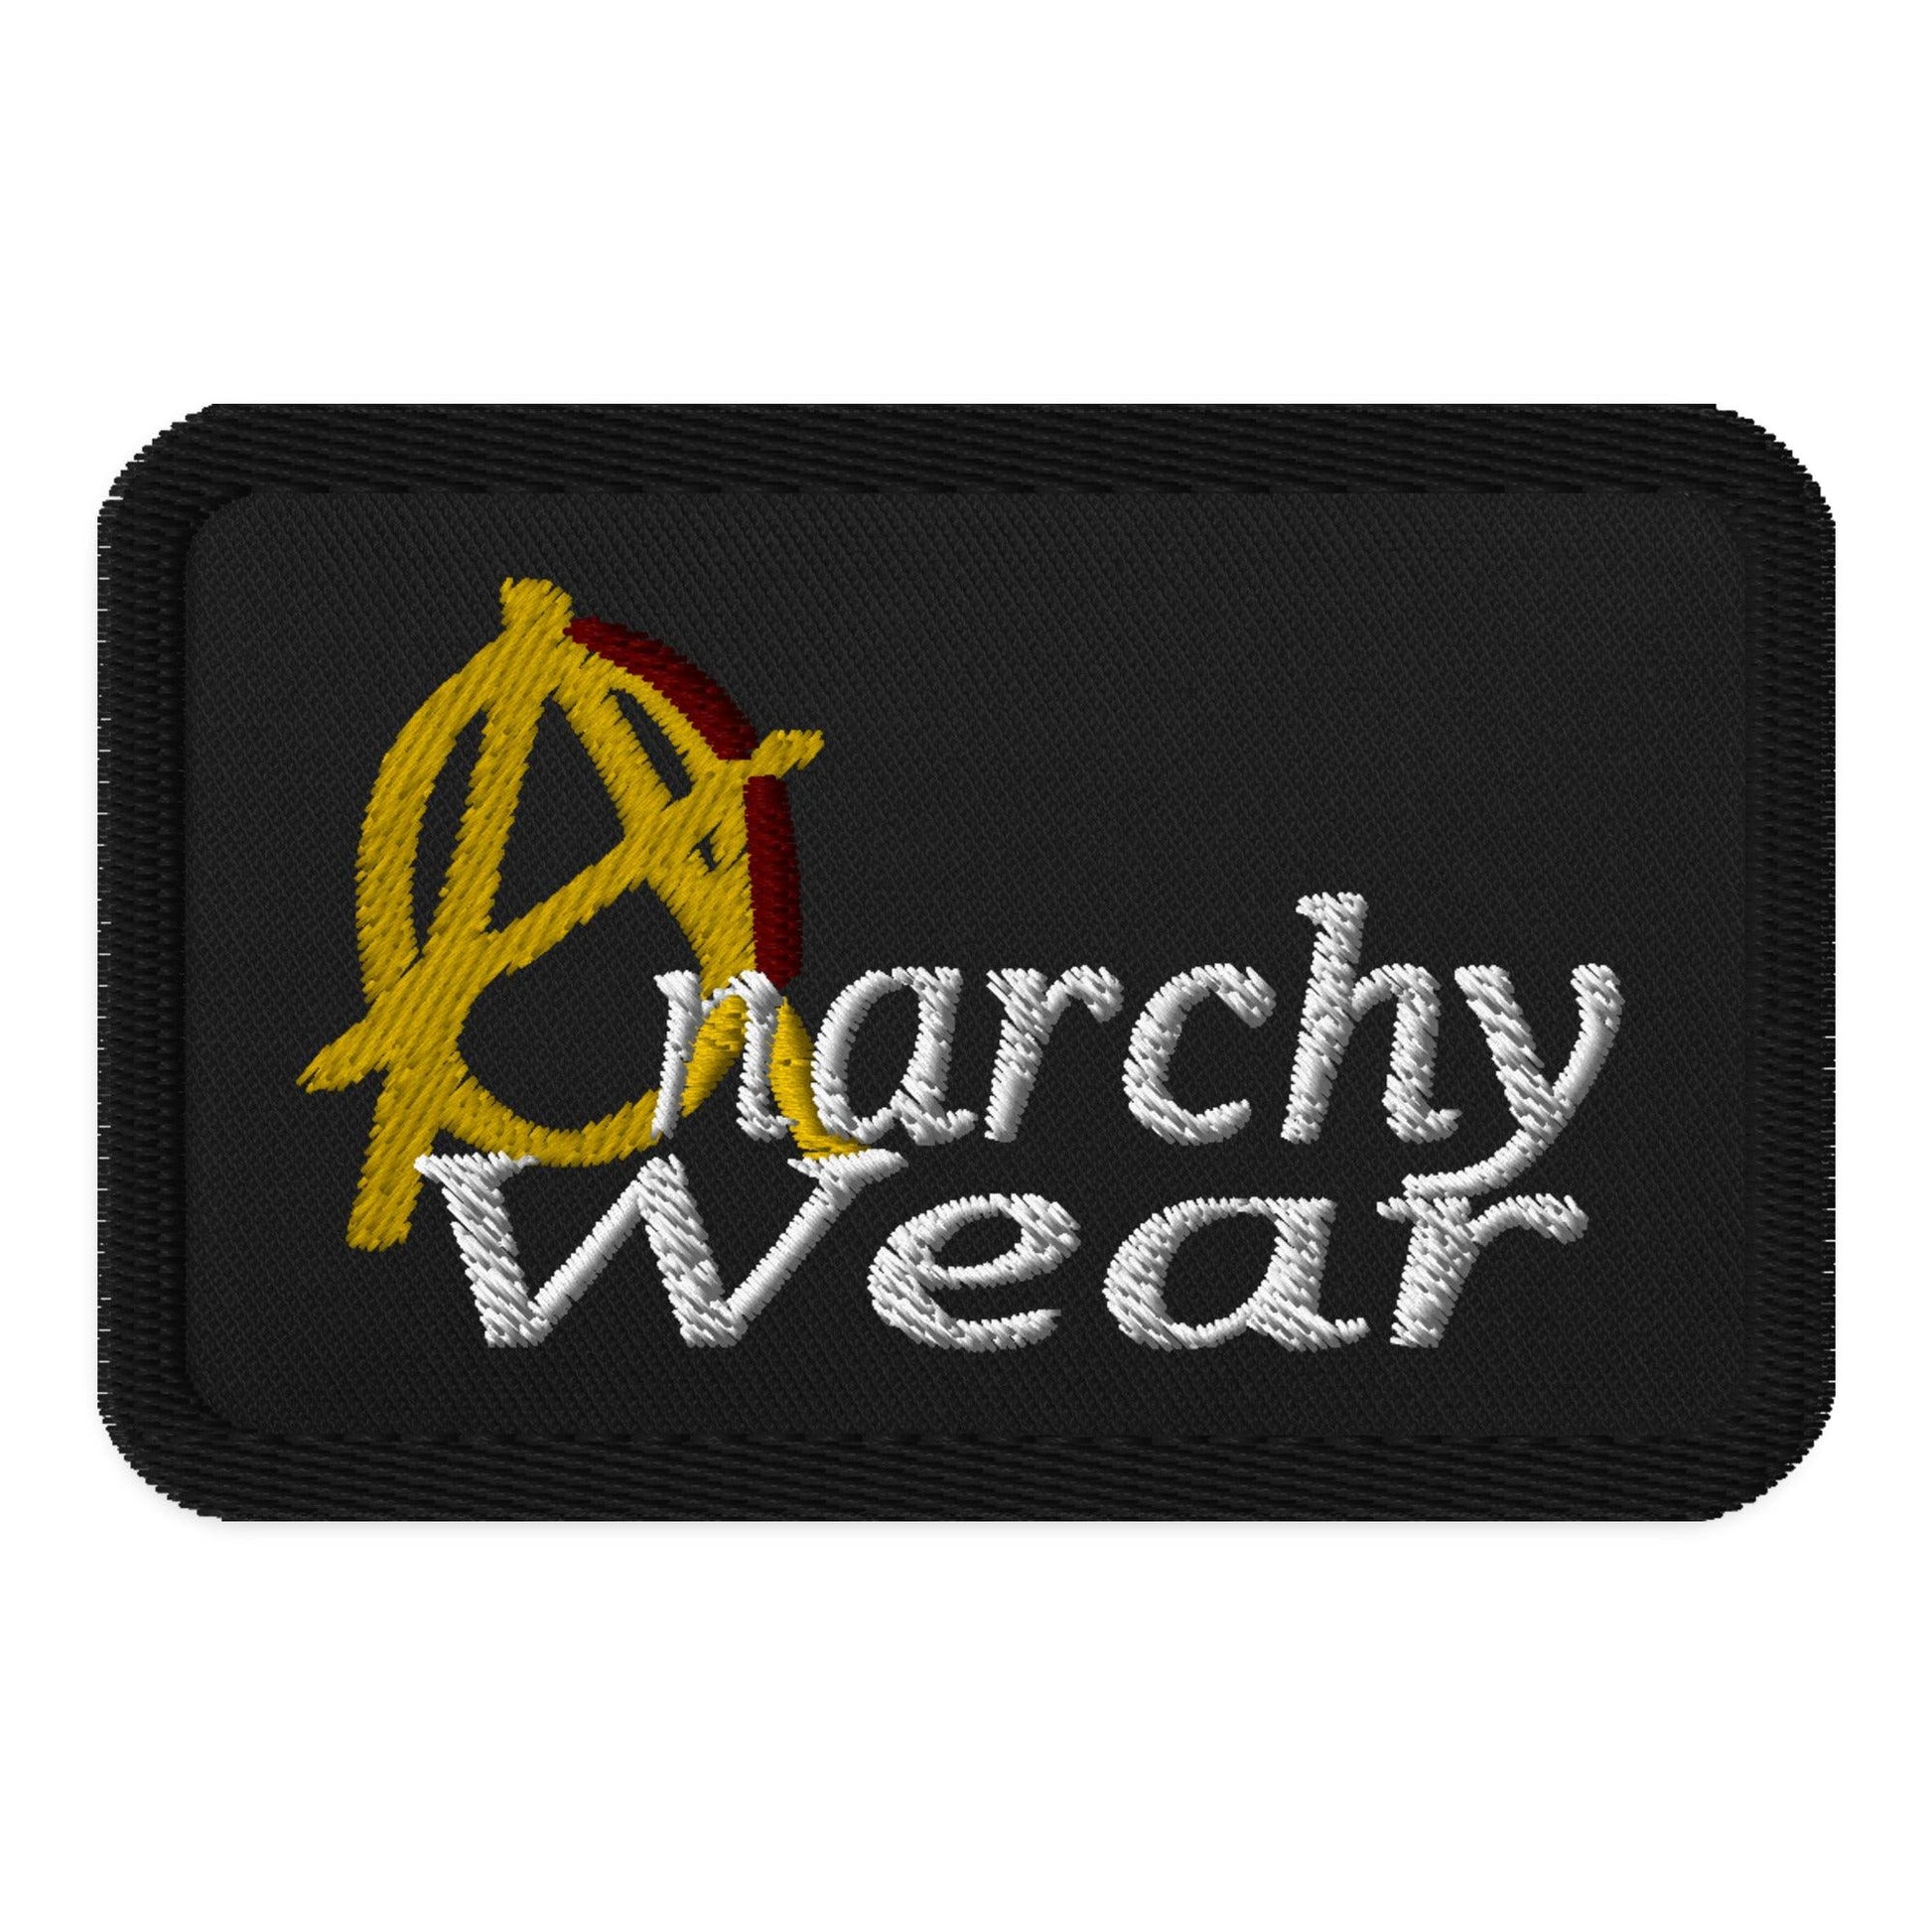 Embroidered Anarchy Wear Patches - AnarchyWear